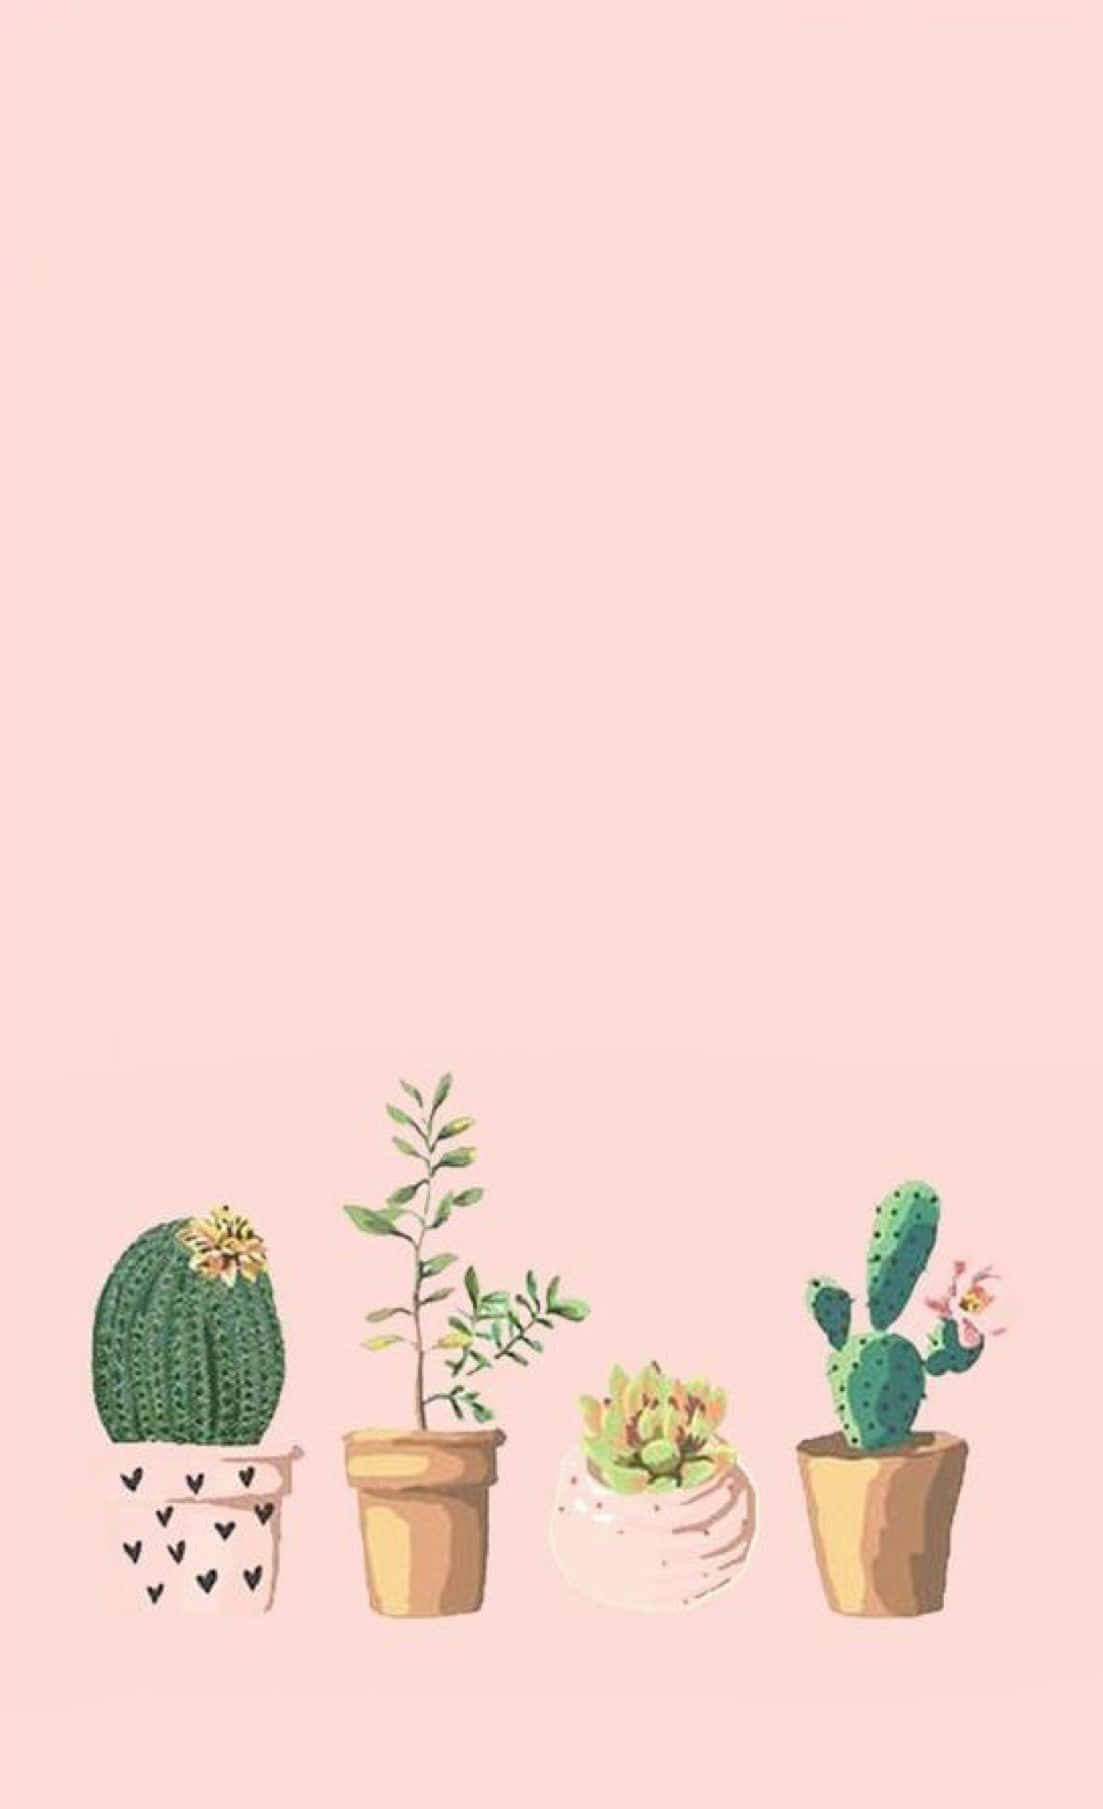 "A Simple and Cute Iphone for Any Occasion" Wallpaper